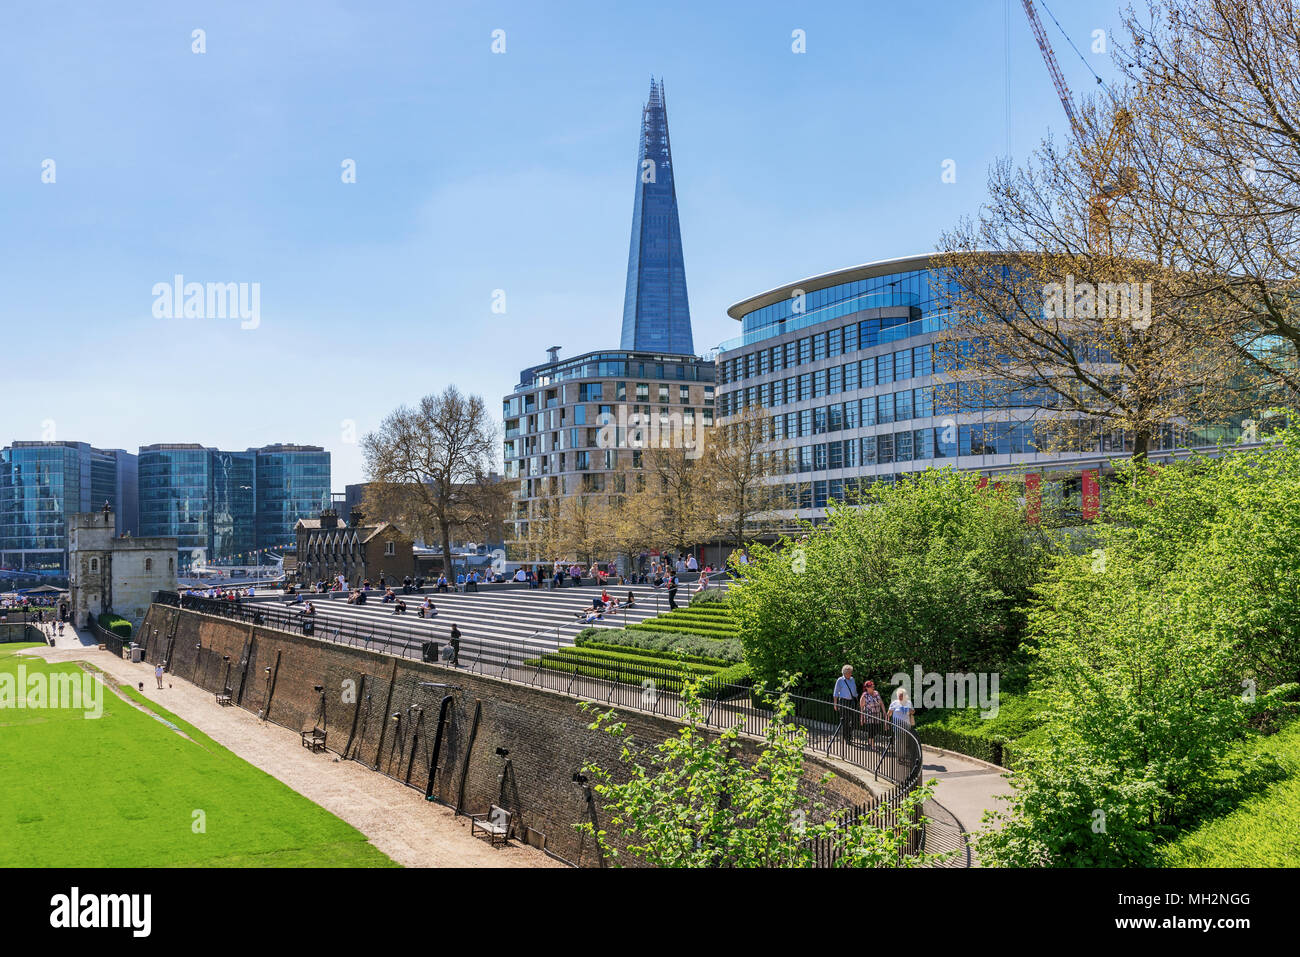 LONDON, UNITED KINGDOM - APRIL 19: View of The Sard and London city buildings in the downtown area on April 19, 2018 in London Stock Photo